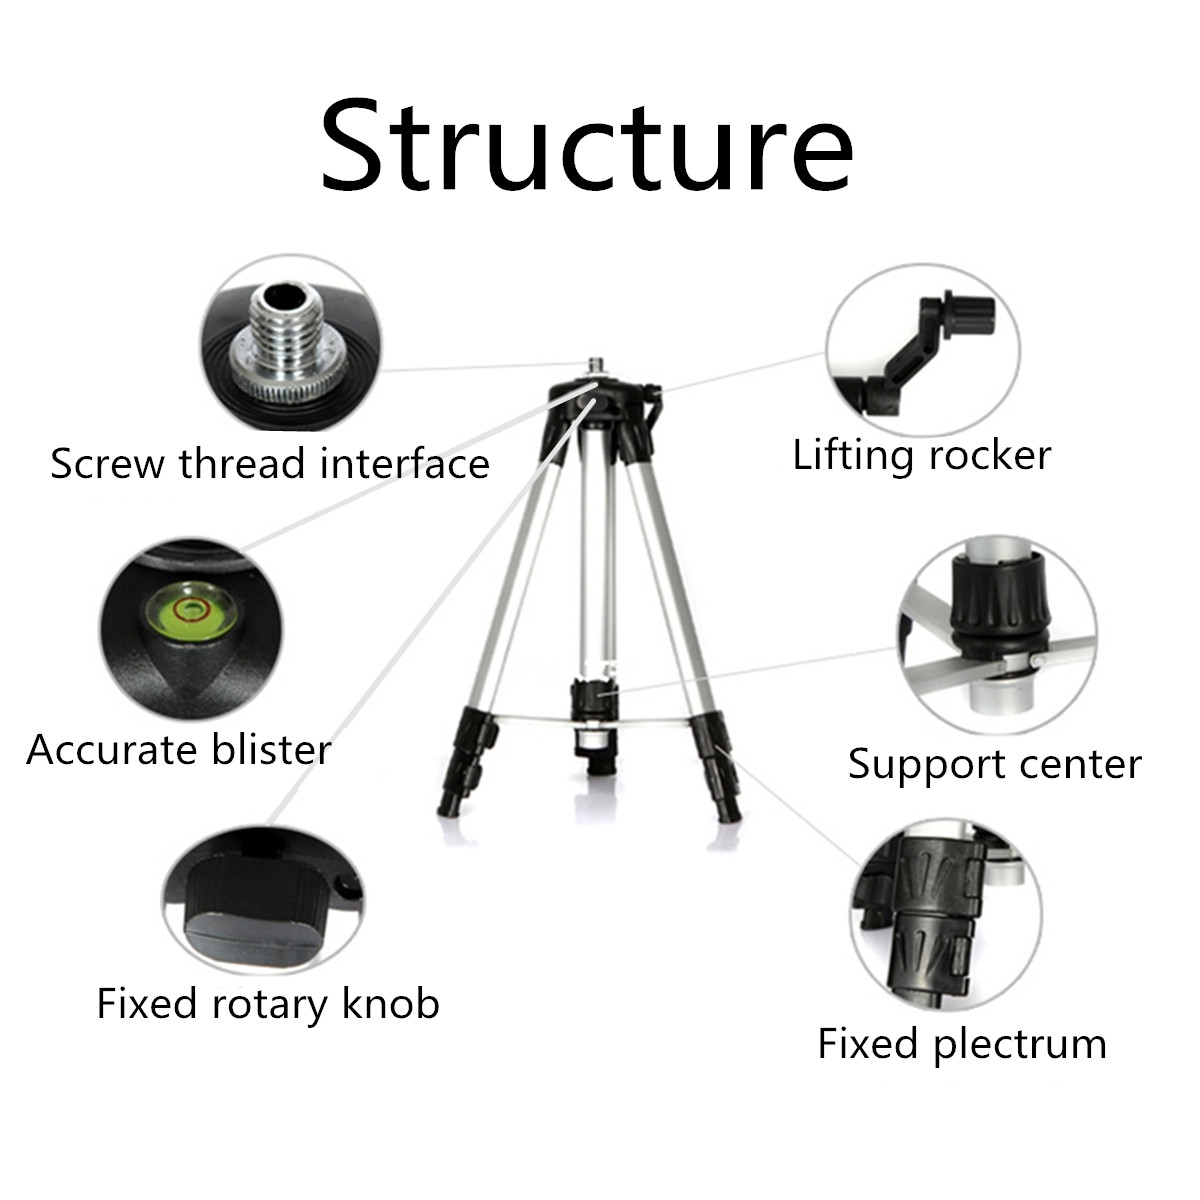 Green-2-Line-2-Points-Laser-Level-360-Rotary-Laser-Line-Self-Leveling-with-Tripod-1166735-6